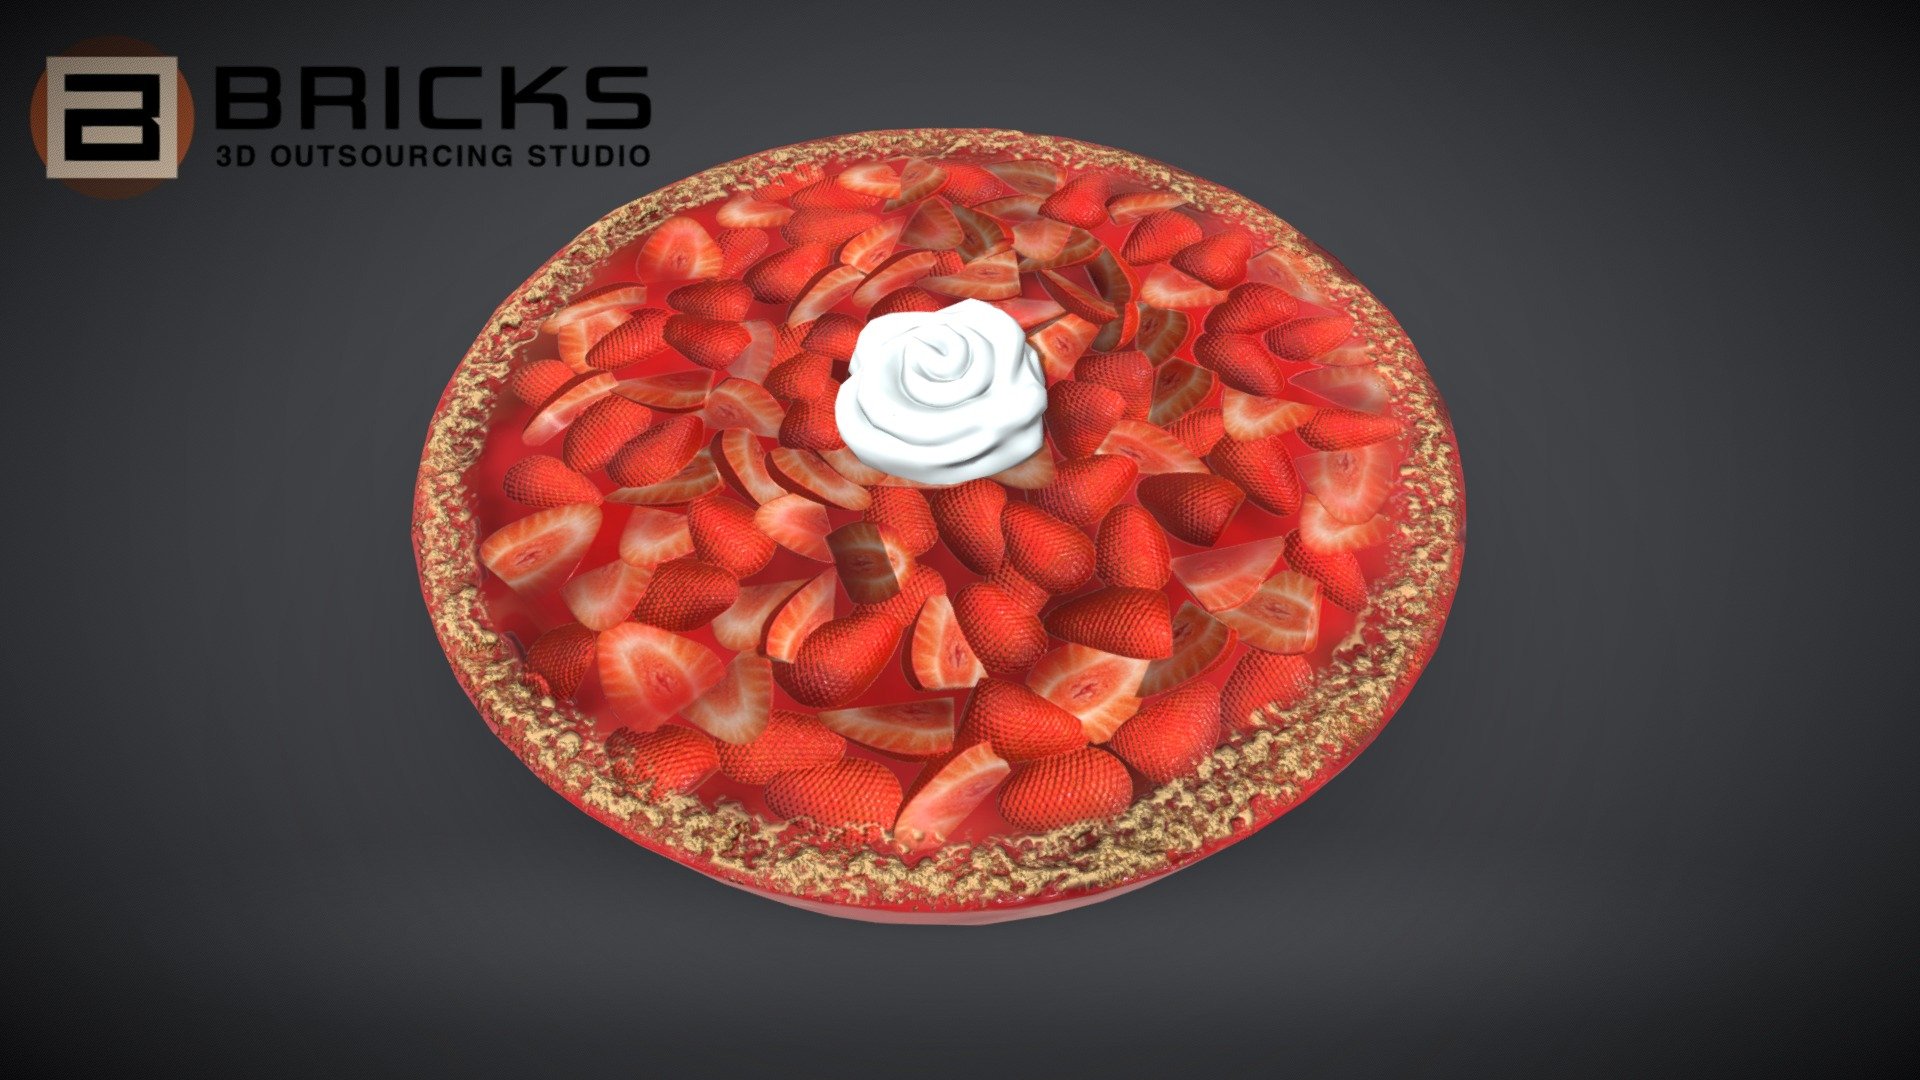 PBR Food Asset:
PieStrawberry
Polycount: 1333   

Vertex count: 677
Texture Size: 2048px x 2048px
Normal: OpenGL

If you need any adjust in file please contact us: team@bricks3dstudio.com

Hire us: tringuyen@bricks3dstudio.com
Here is us: https://www.bricks3dstudio.com/
        https://www.artstation.com/bricksstudio
        https://www.facebook.com/Bricks3dstudio/
        https://www.linkedin.com/in/bricks-studio-b10462252/ - PieStrawberry - Buy Royalty Free 3D model by Bricks Studio (@bricks3dstudio) 3d model